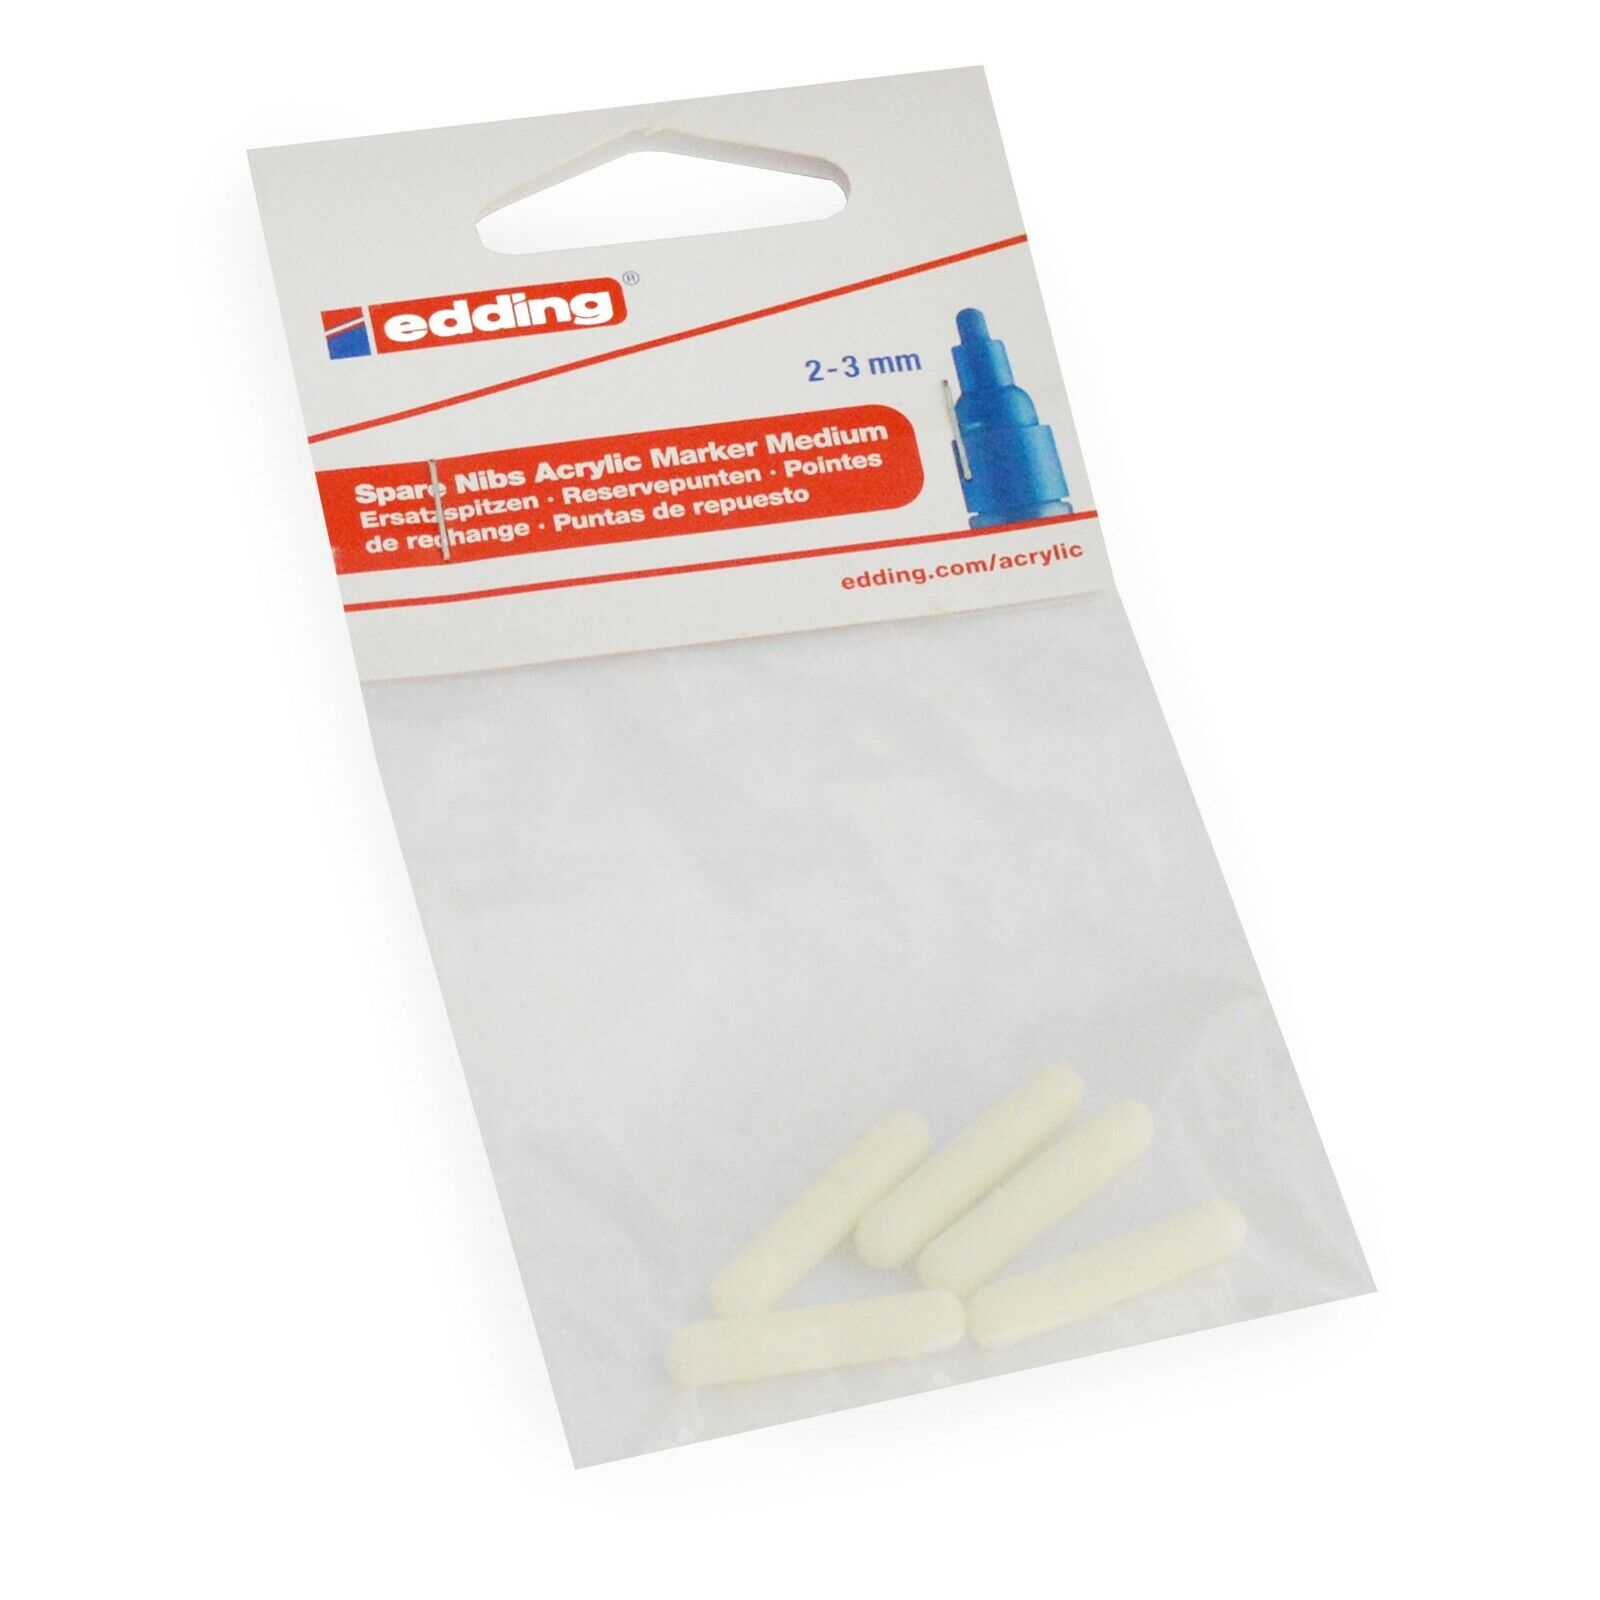 Edding Acrylic Marker Spare Nibs - 5100 Fine 1-2mm - Pack of 5